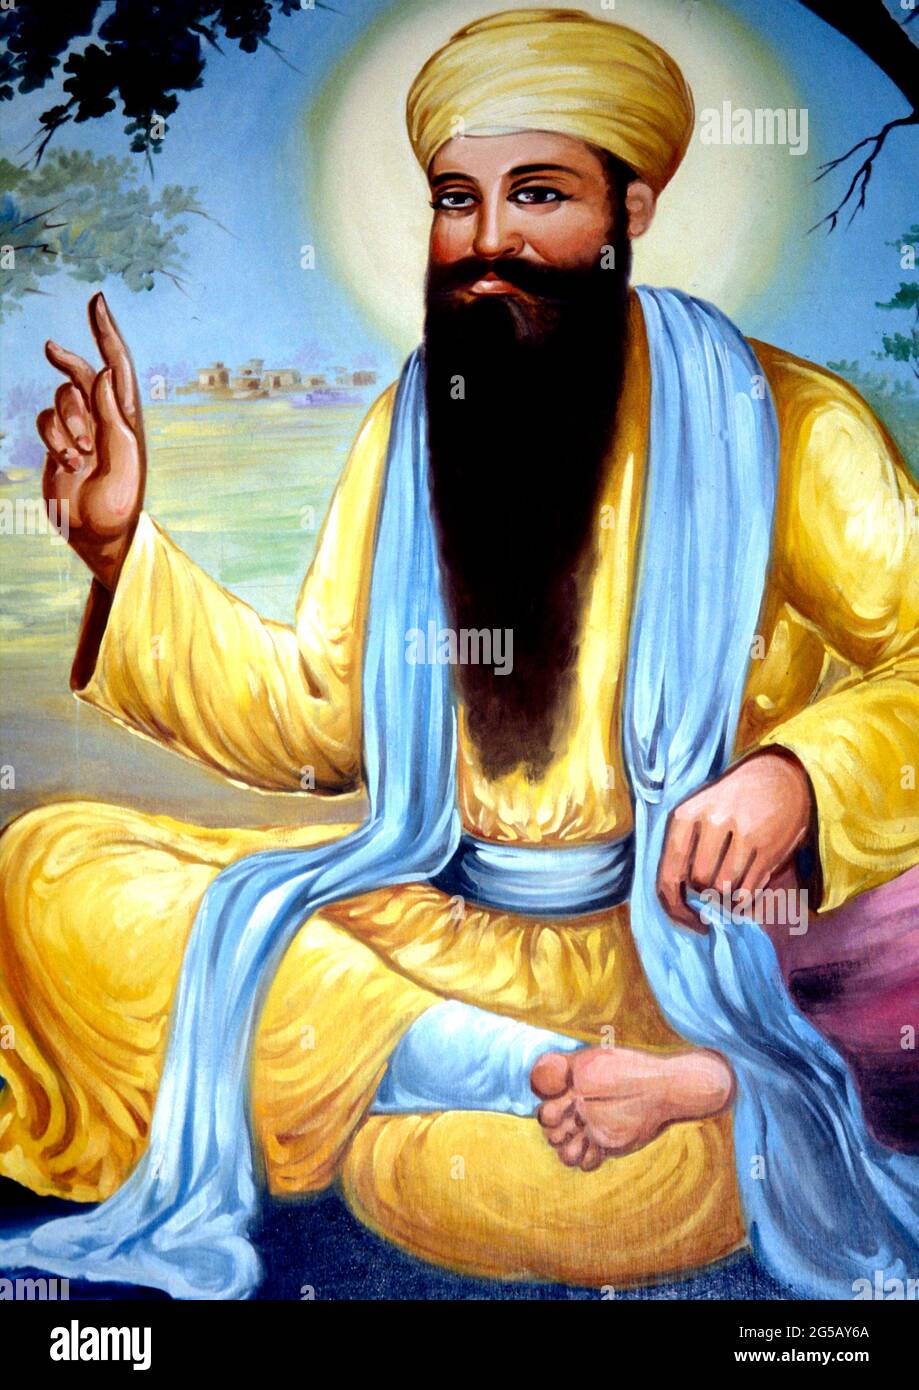 Guru Arjan Dev, the fifth Sikh guru, born in 1563.He compiled all the teachings of previous gurus into one book known as the Adi Granth. Died 1606. Stock Photo